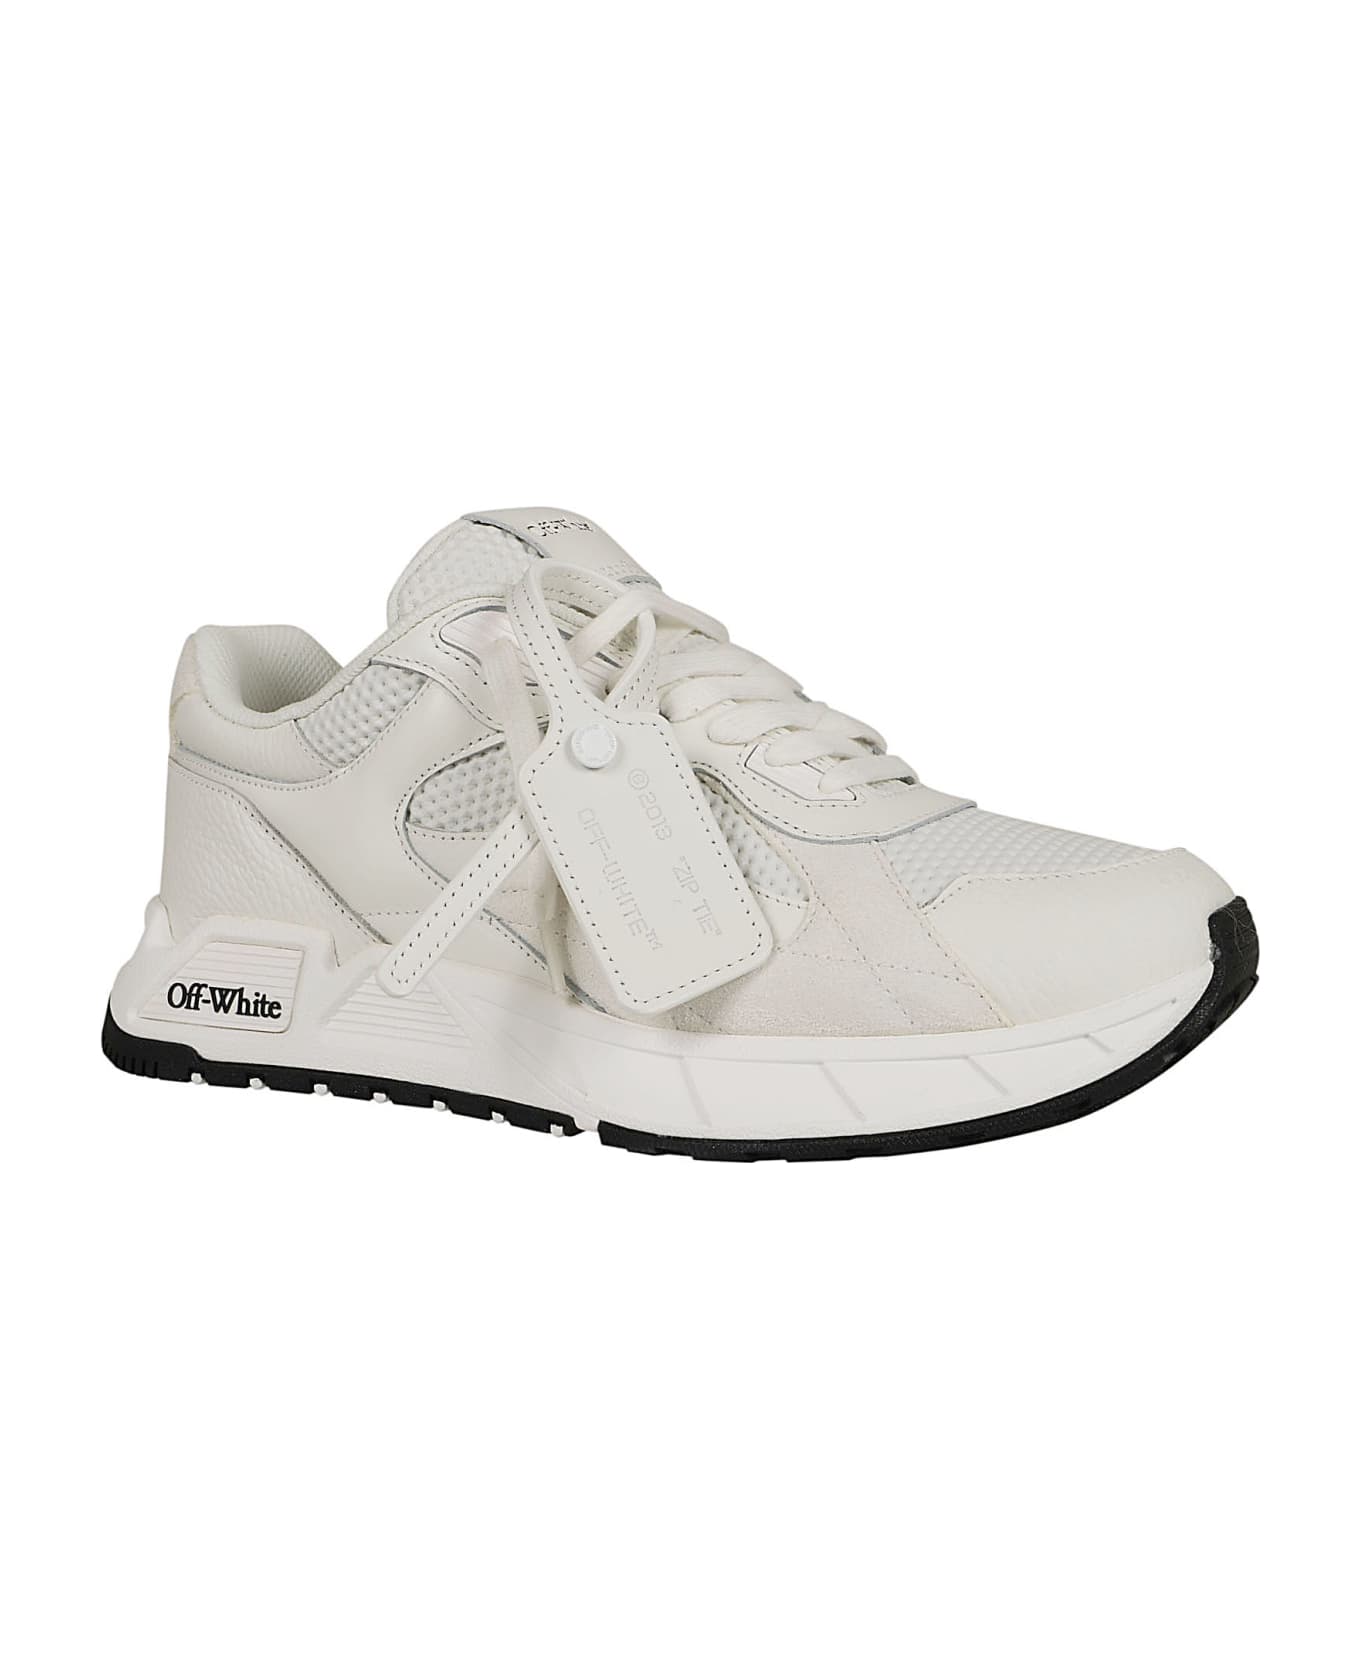 Off-White Kick Off Lace-up Sneakers - White White